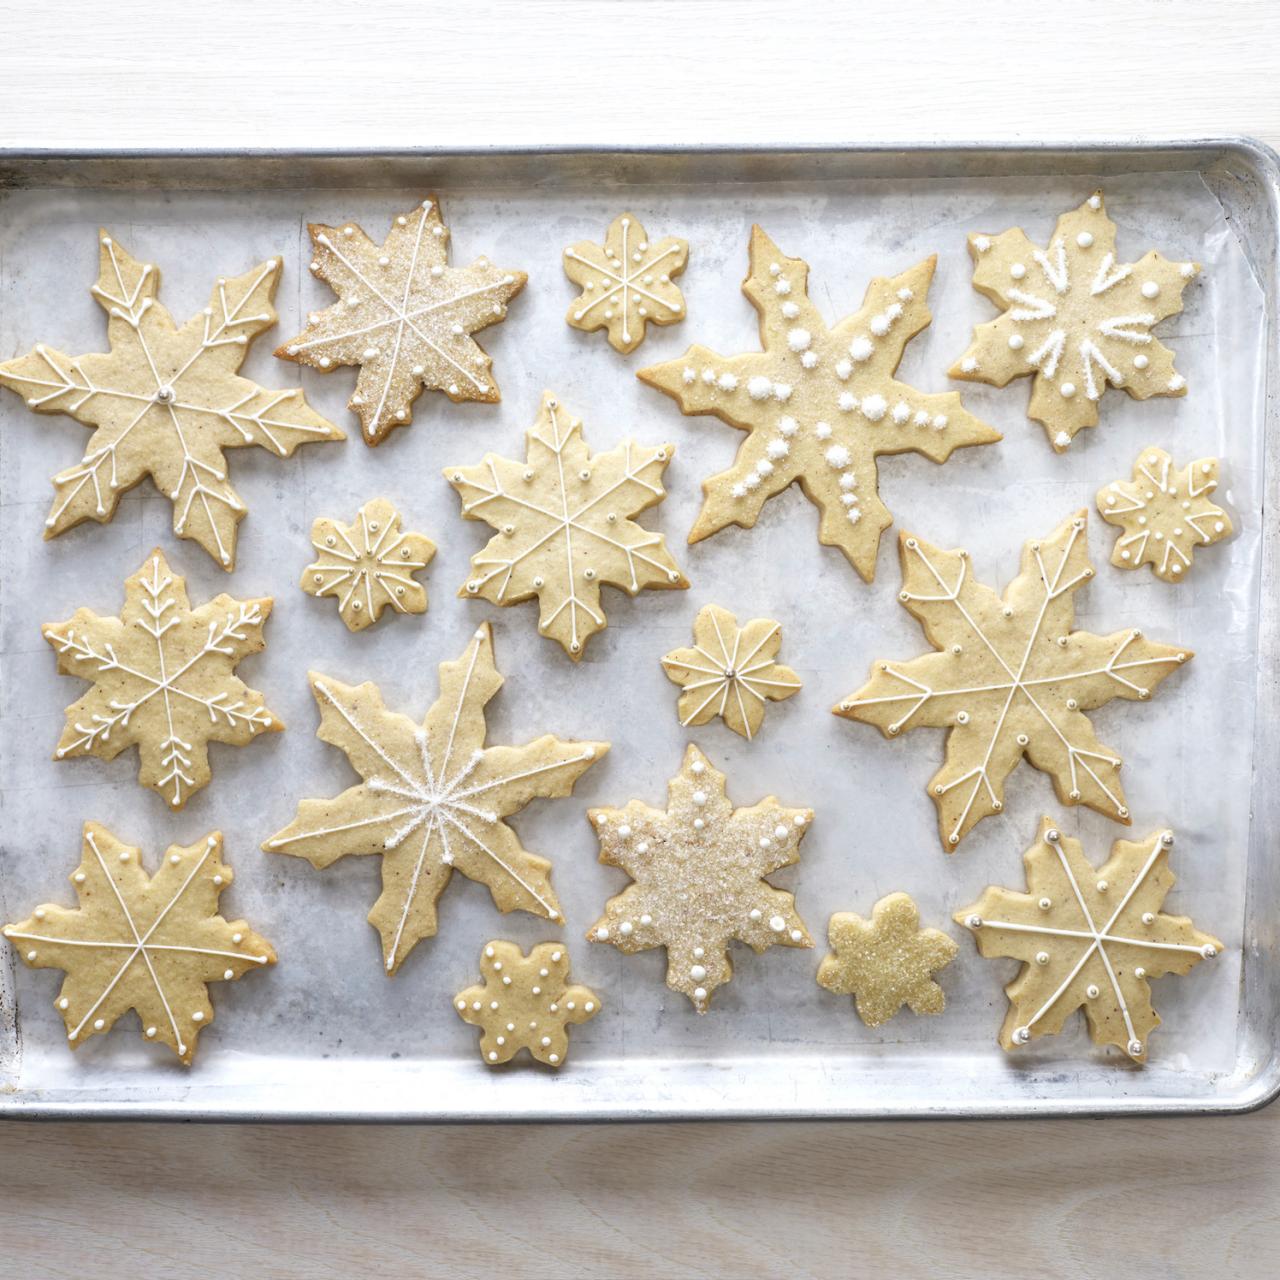 Best Baked Goods to Freeze When You're Baking A LOT